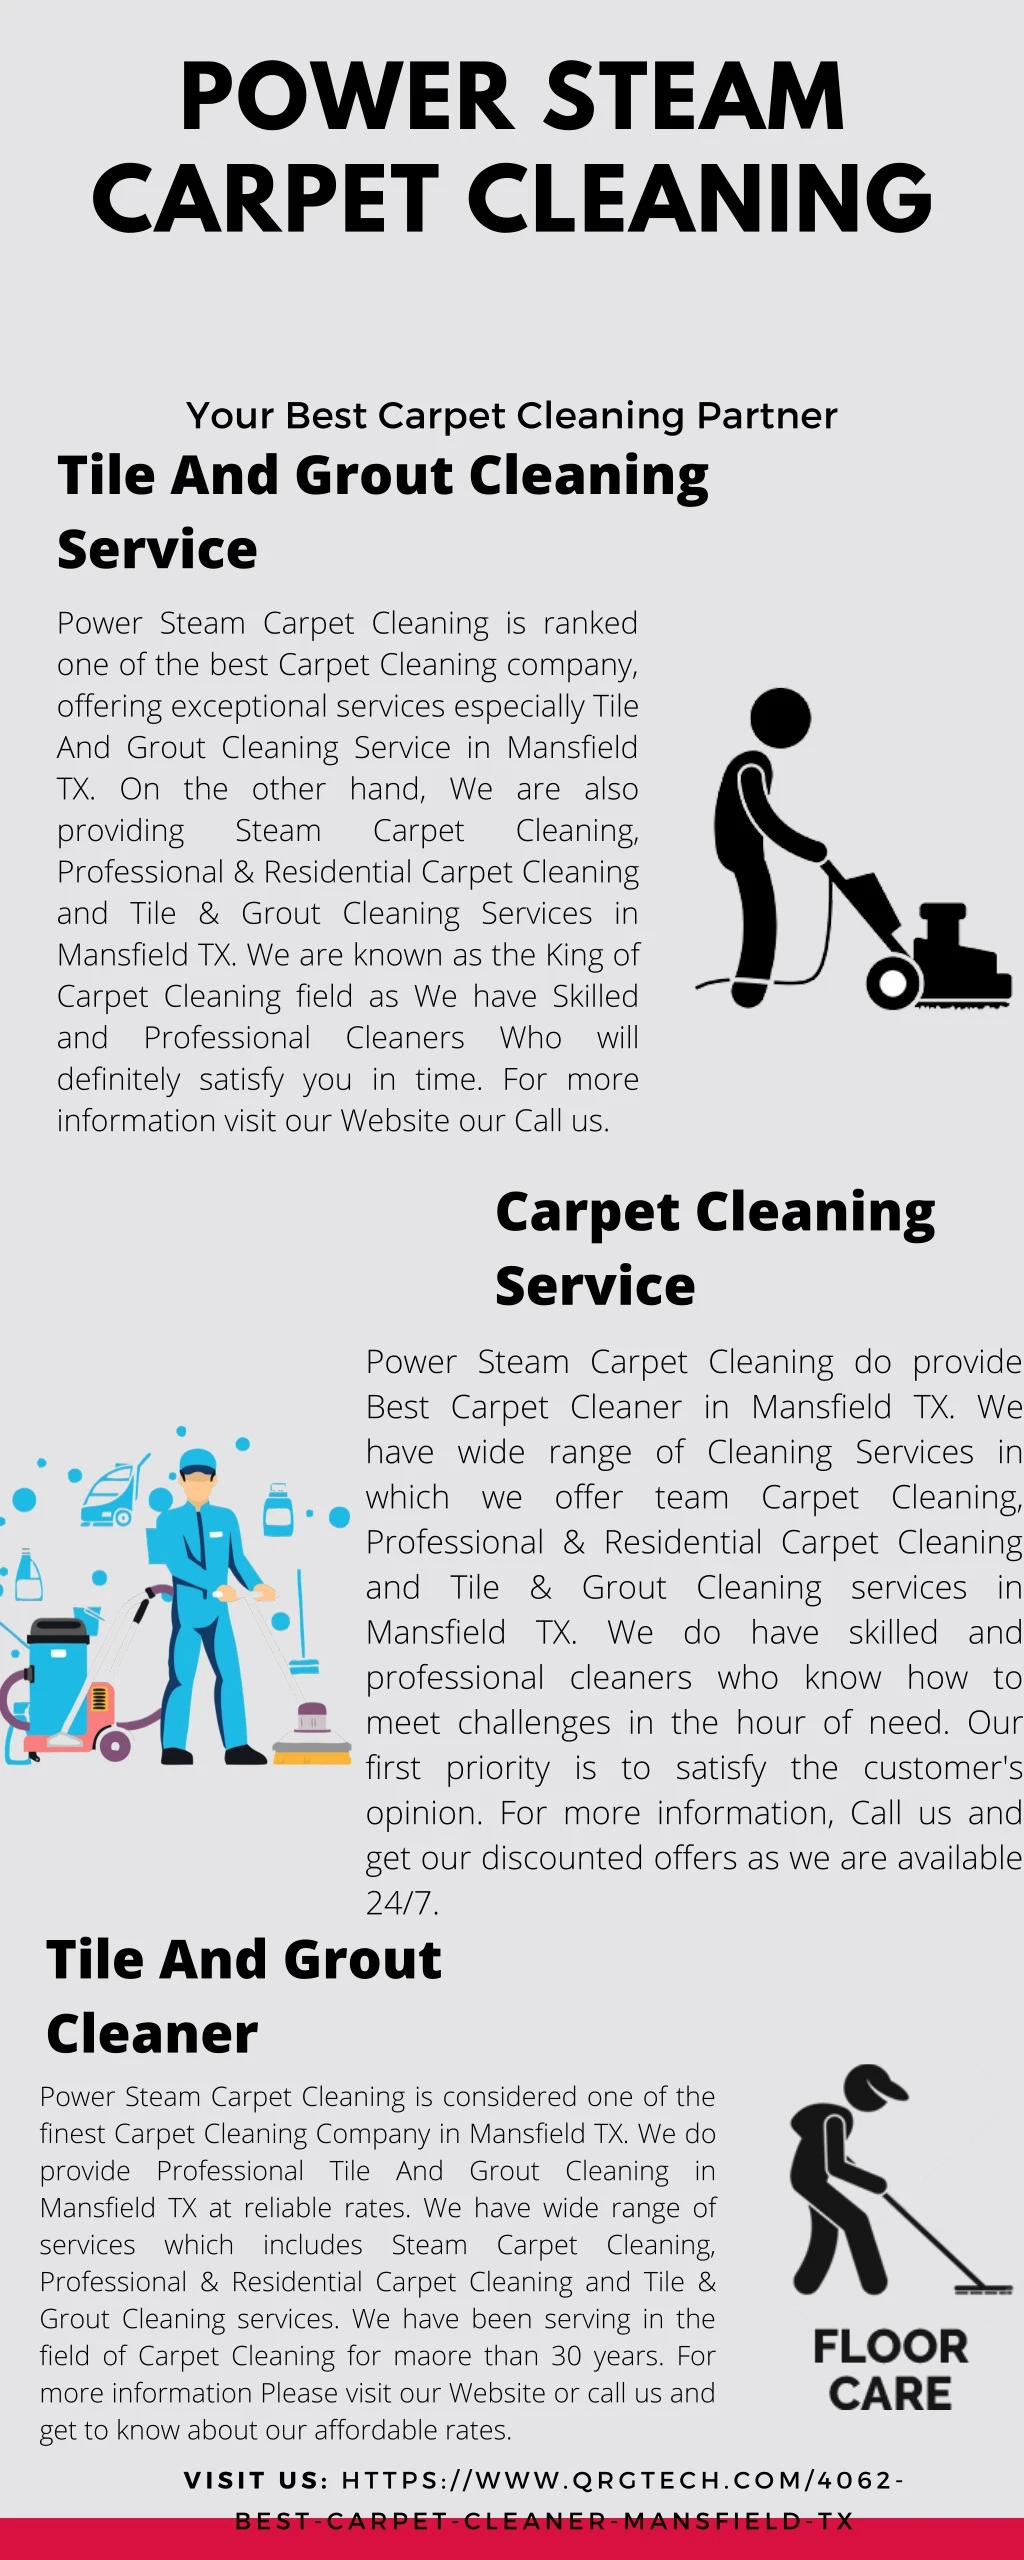 power steam carpet cleaning